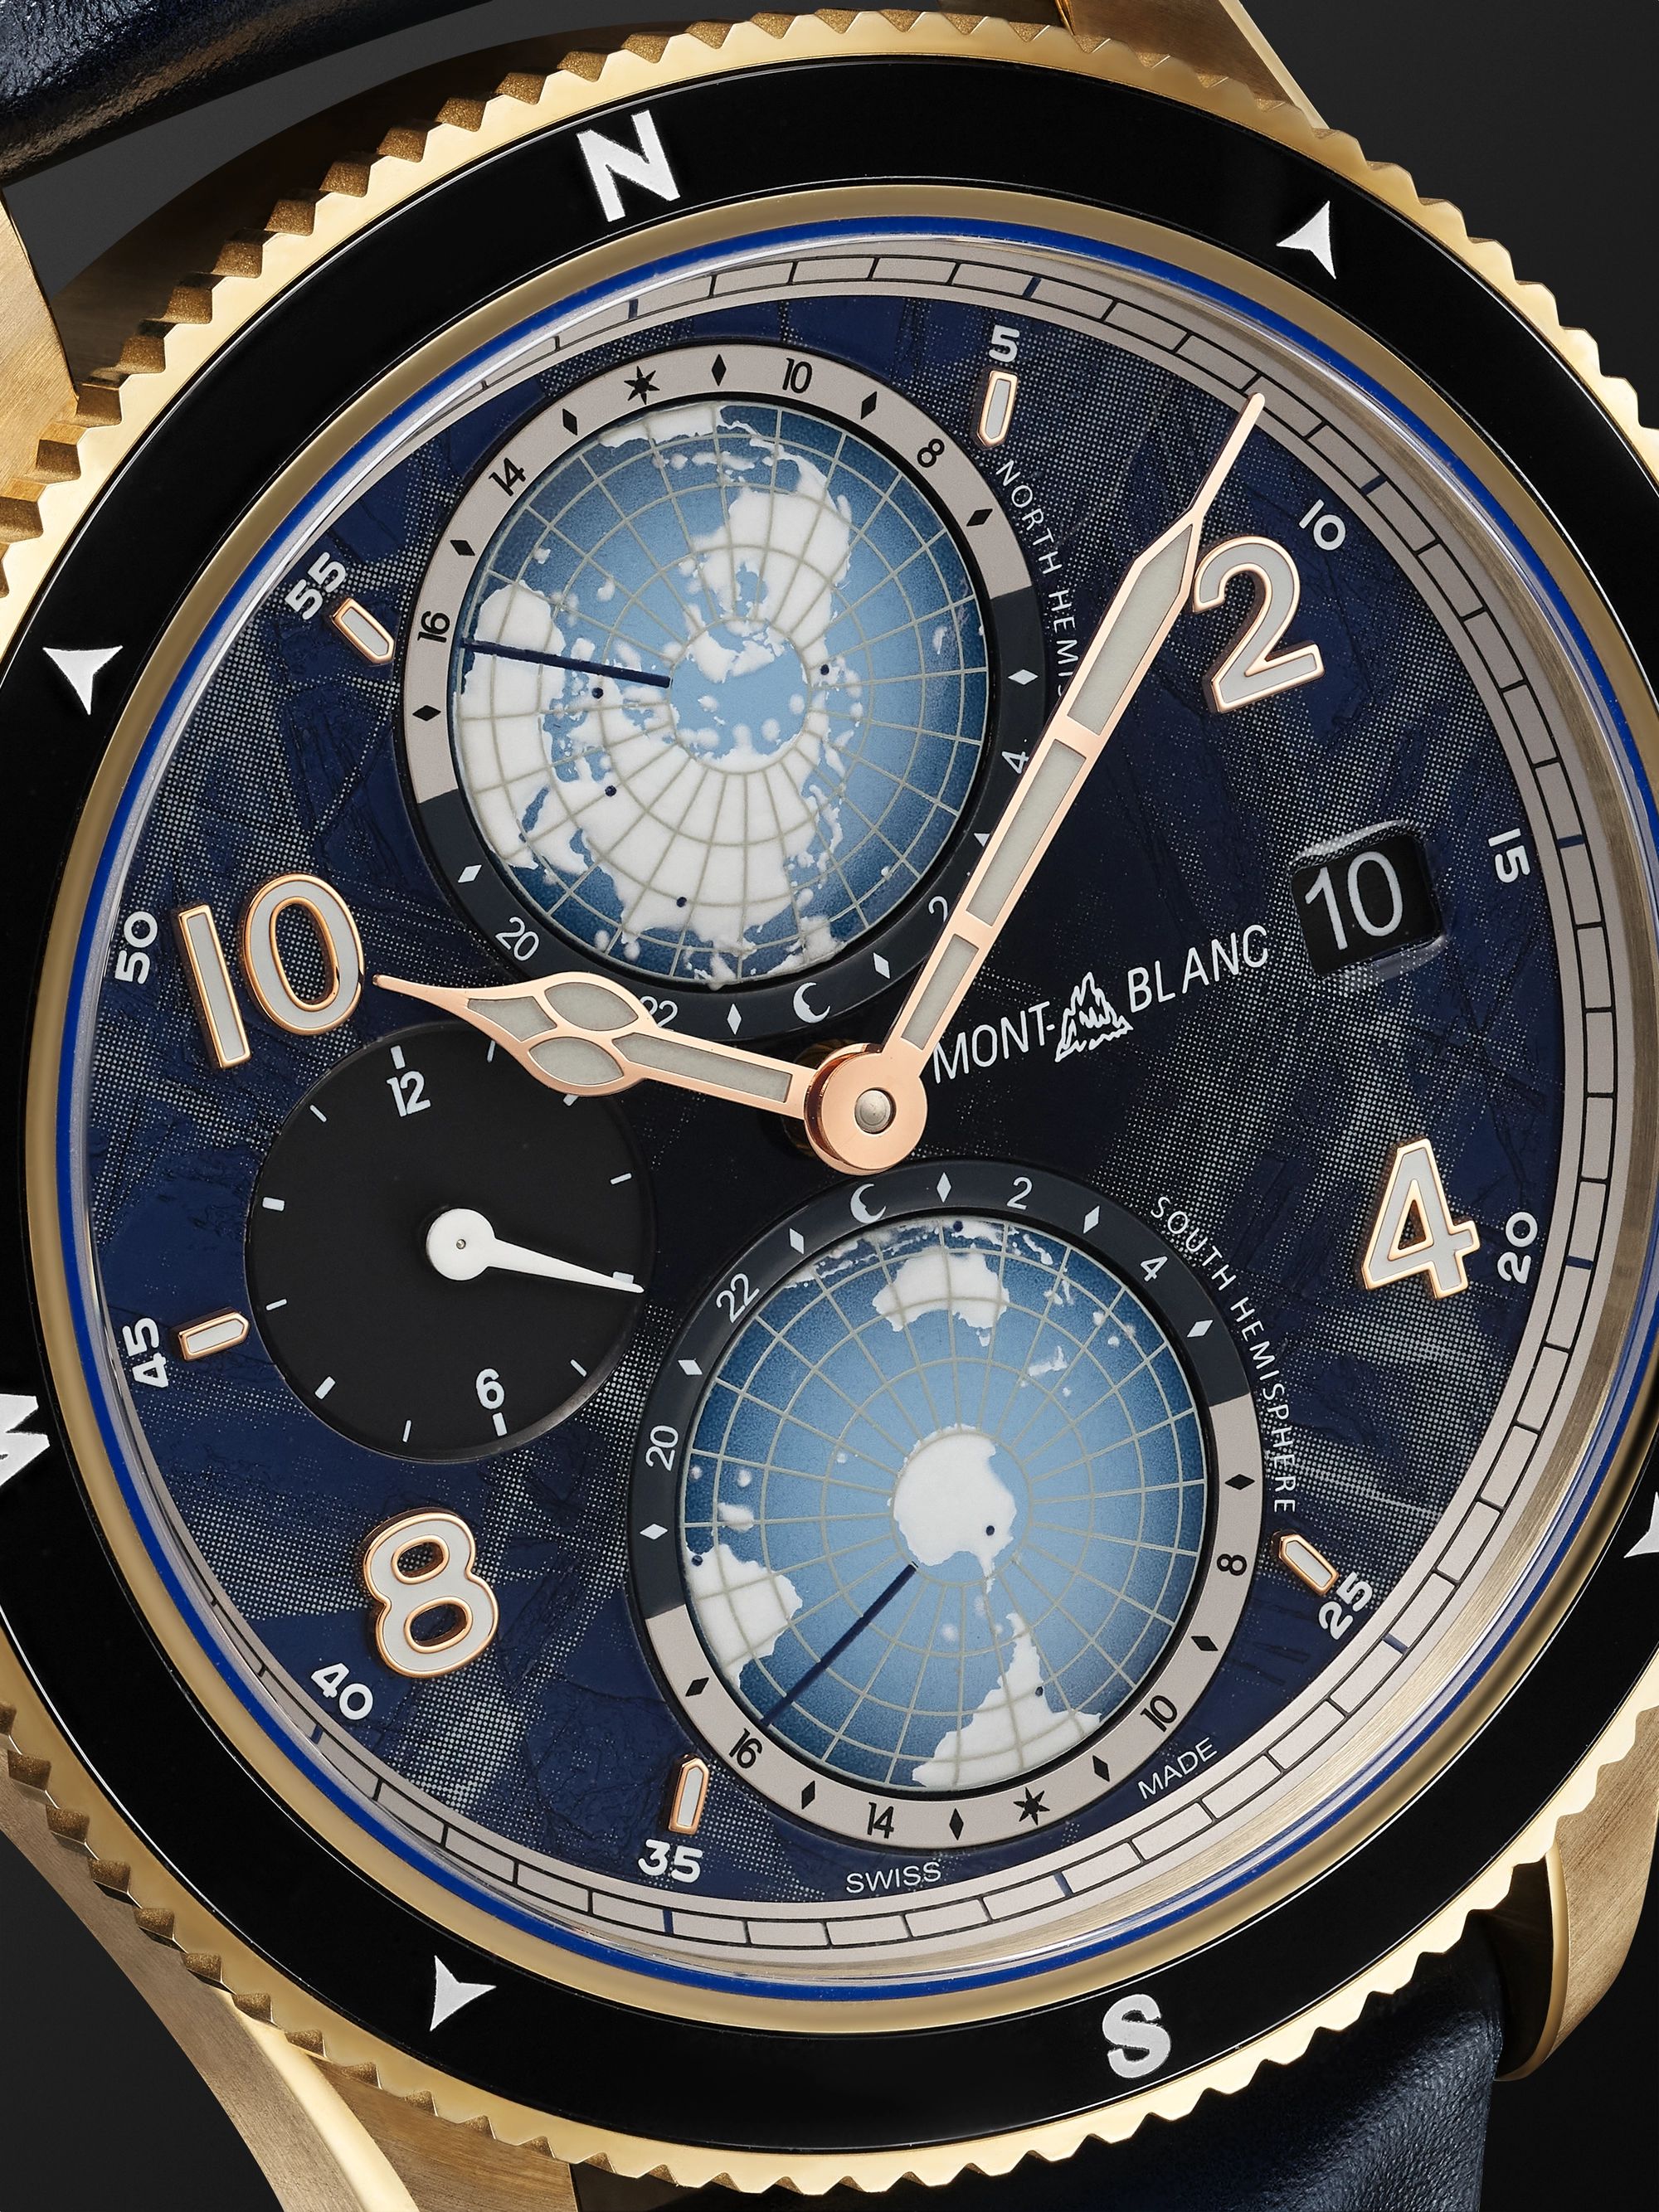 MONTBLANC 1858 Geosphere 0 Oxygen Limited Edition Automatic GMT 42mm Bronze, Ceramic and Leather Watch, Ref. No. 129415